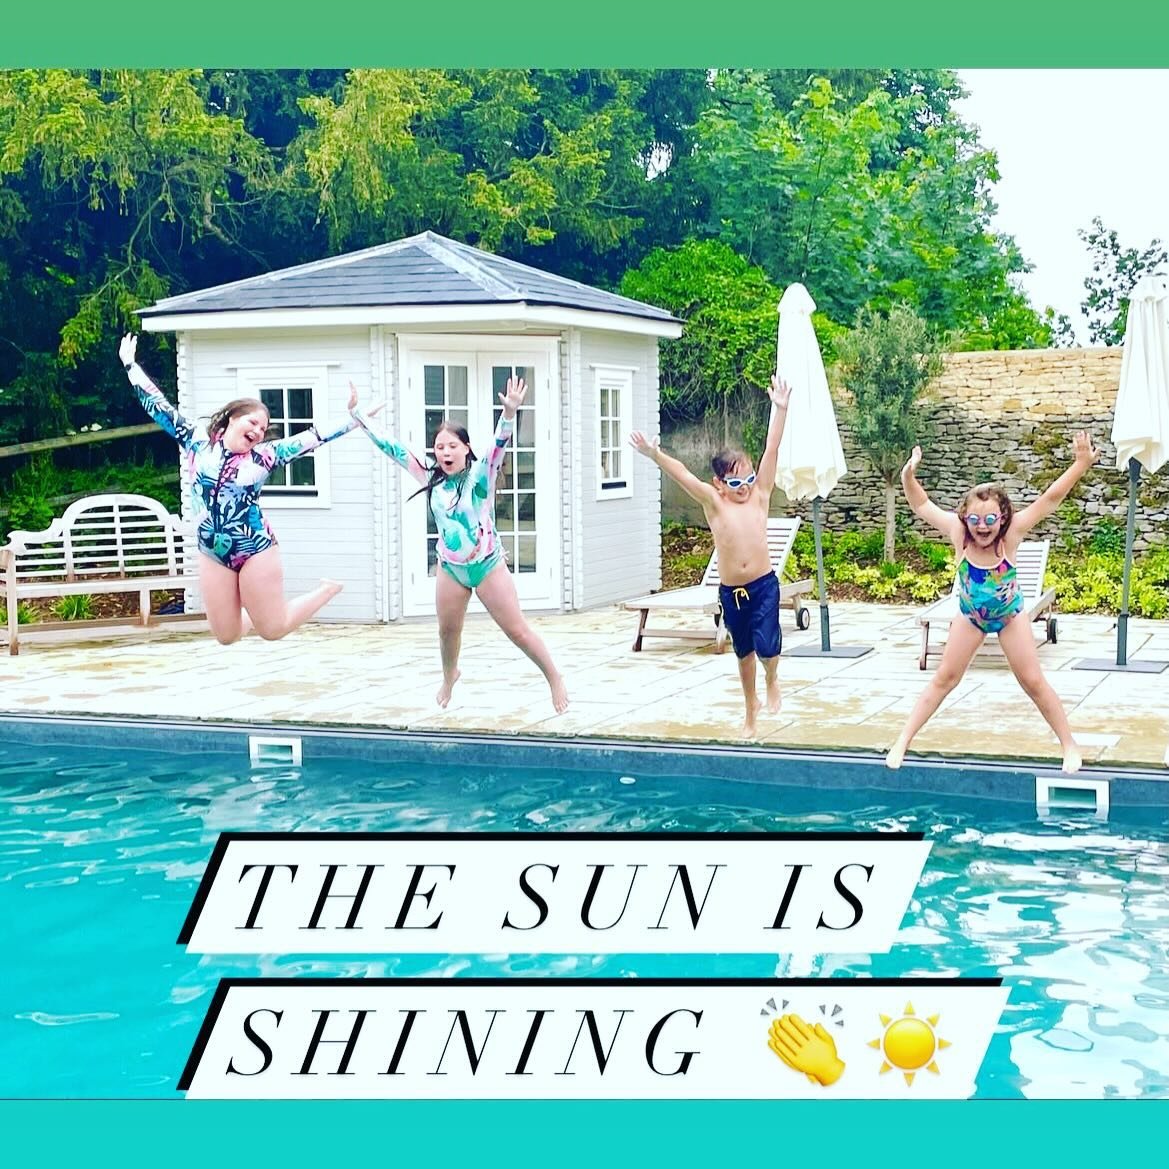 The sun is shining!

Limited availability remaining in the school holidays.  Availability 31st May for three nights and 16th August for a week. Book on our website or drop us a message ☀️.